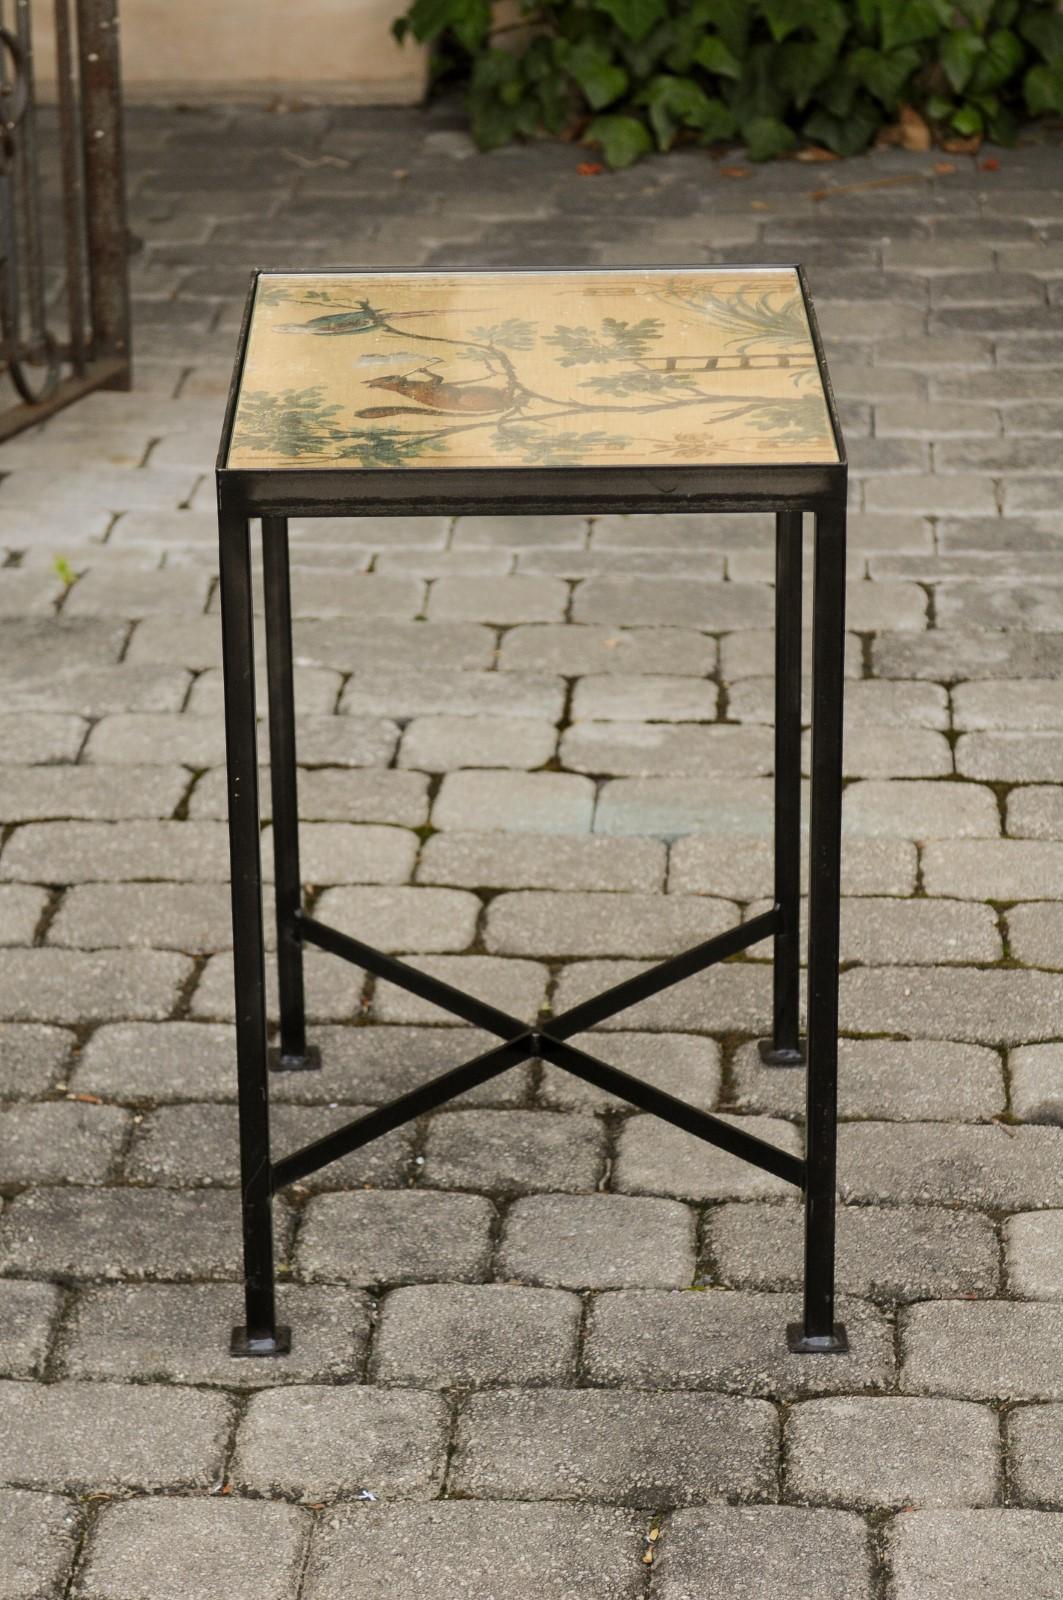 Glass Chinoiserie Contemporary Side Table with Squirrel and Bird Motifs on Iron Base